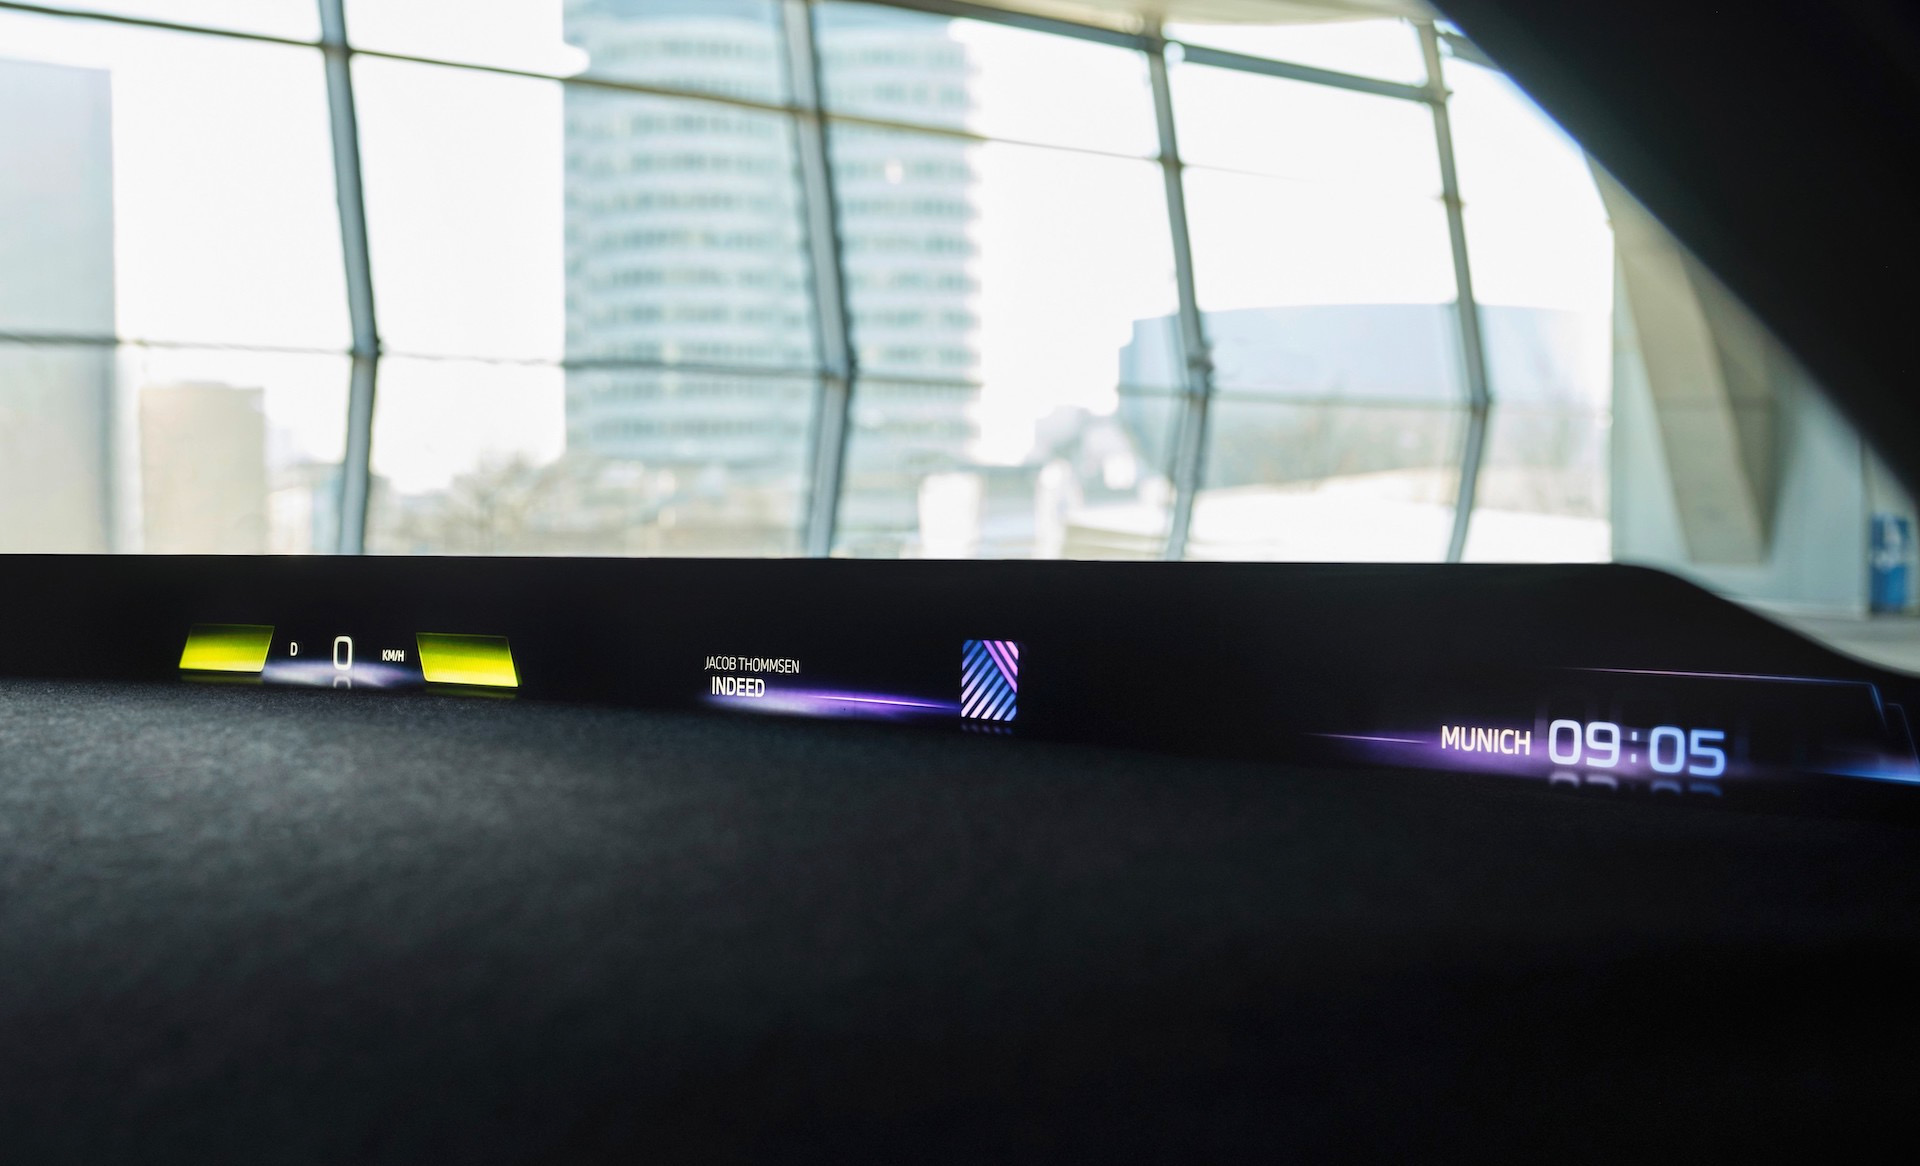 bmw launching full-width ‘panoramic vision’ head-up display in 2025